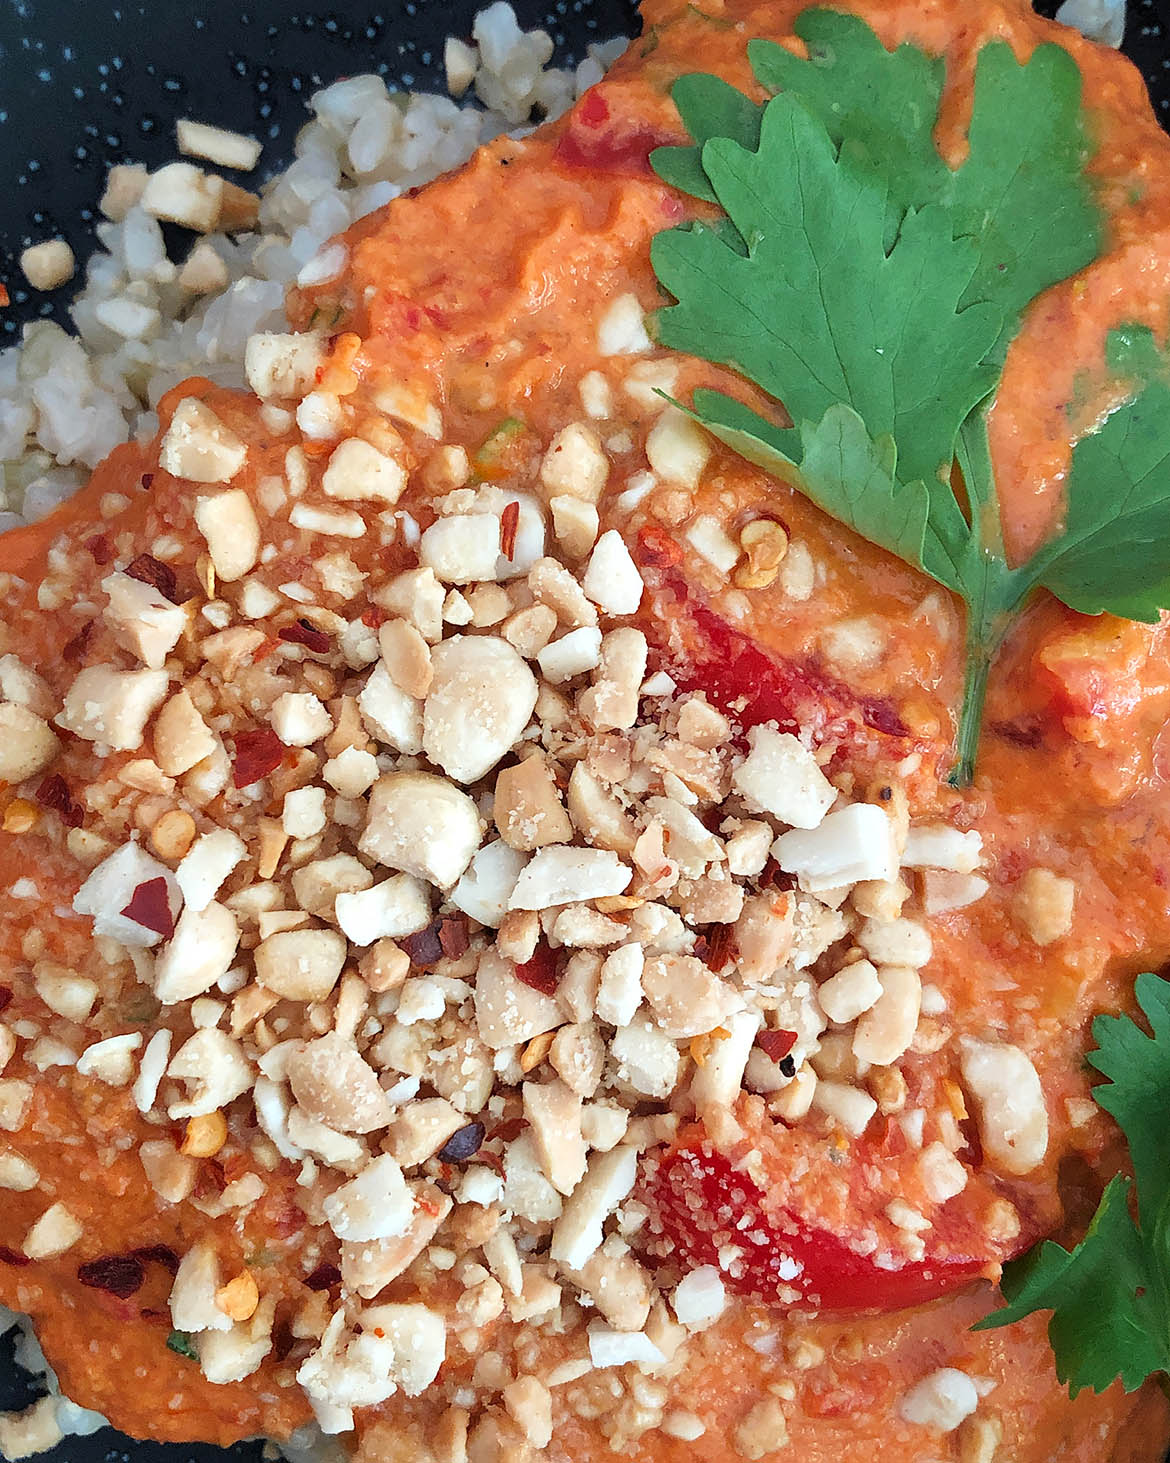 Top-down view of Spicy Tomato Peanut Sauce on brown rice, garnished with chopped peanuts and cilantro